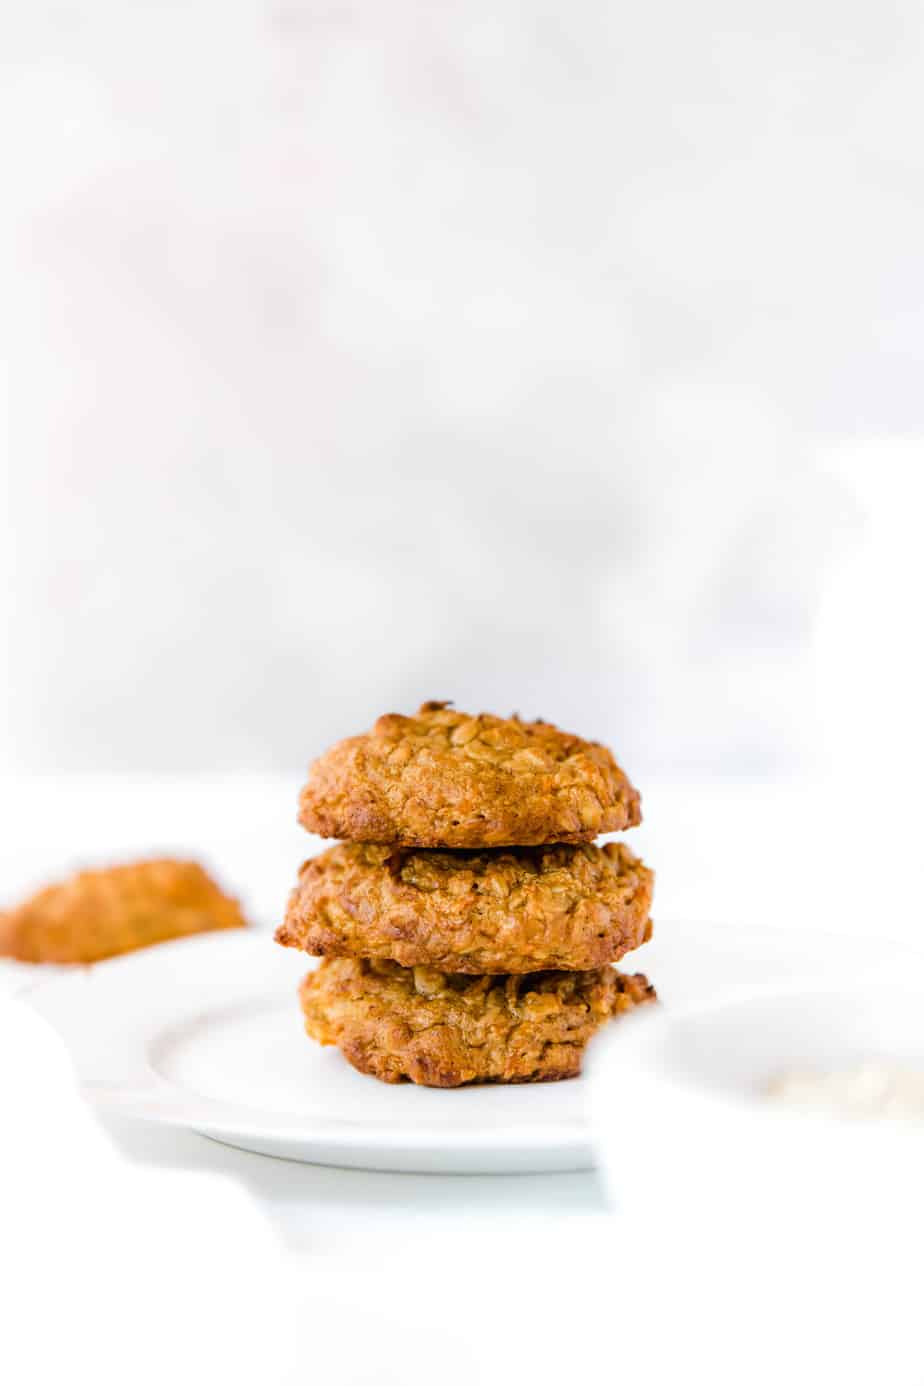 A stack of Healthy Cinnamon Carrot Cookies on a white plate.